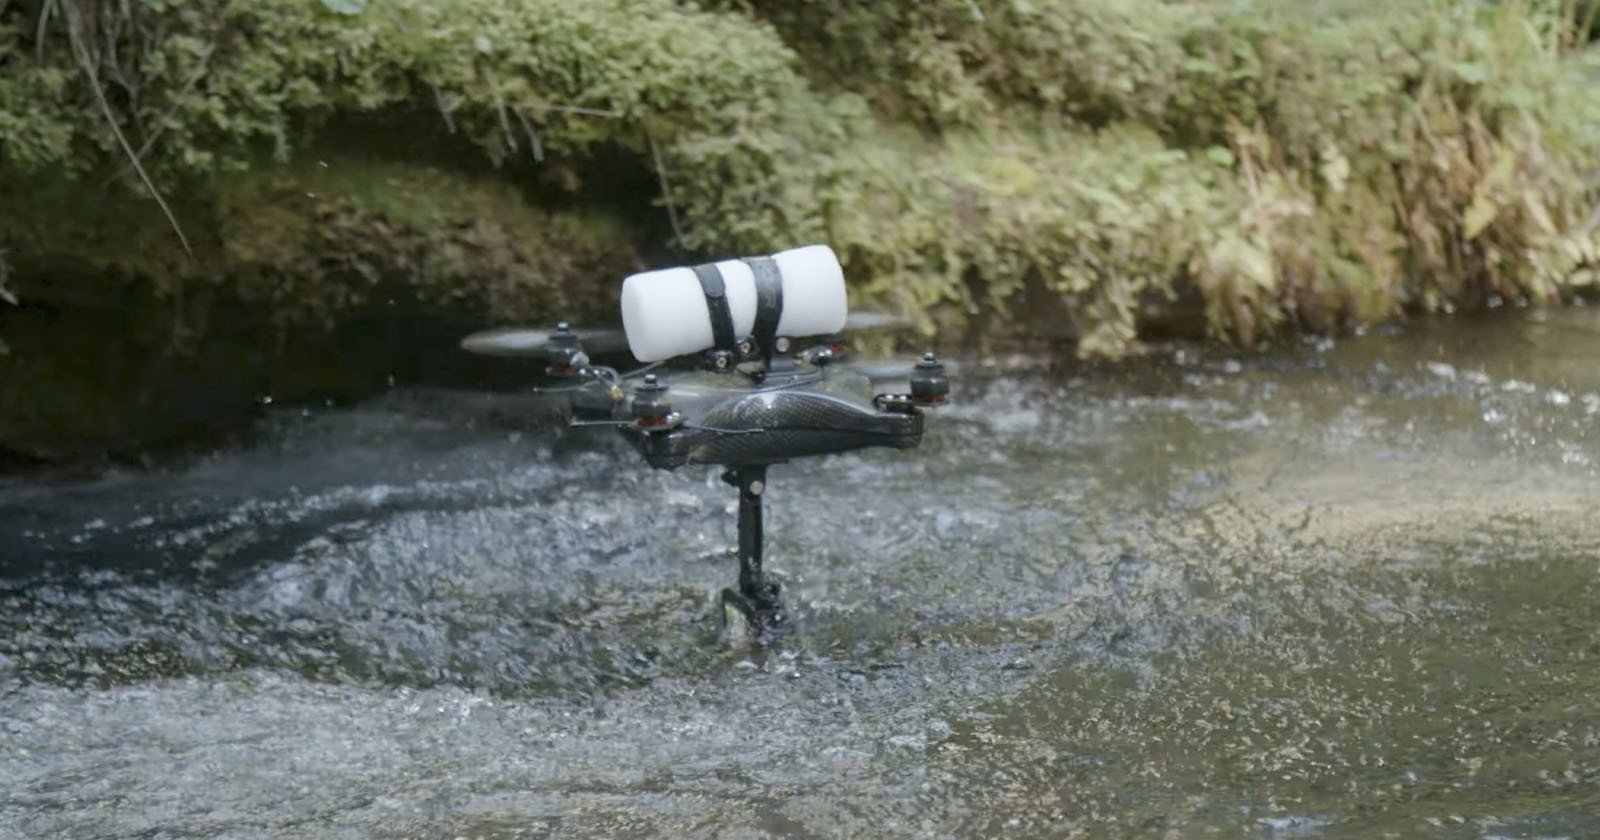  submersible drone can plunge into waterfall reemerge 